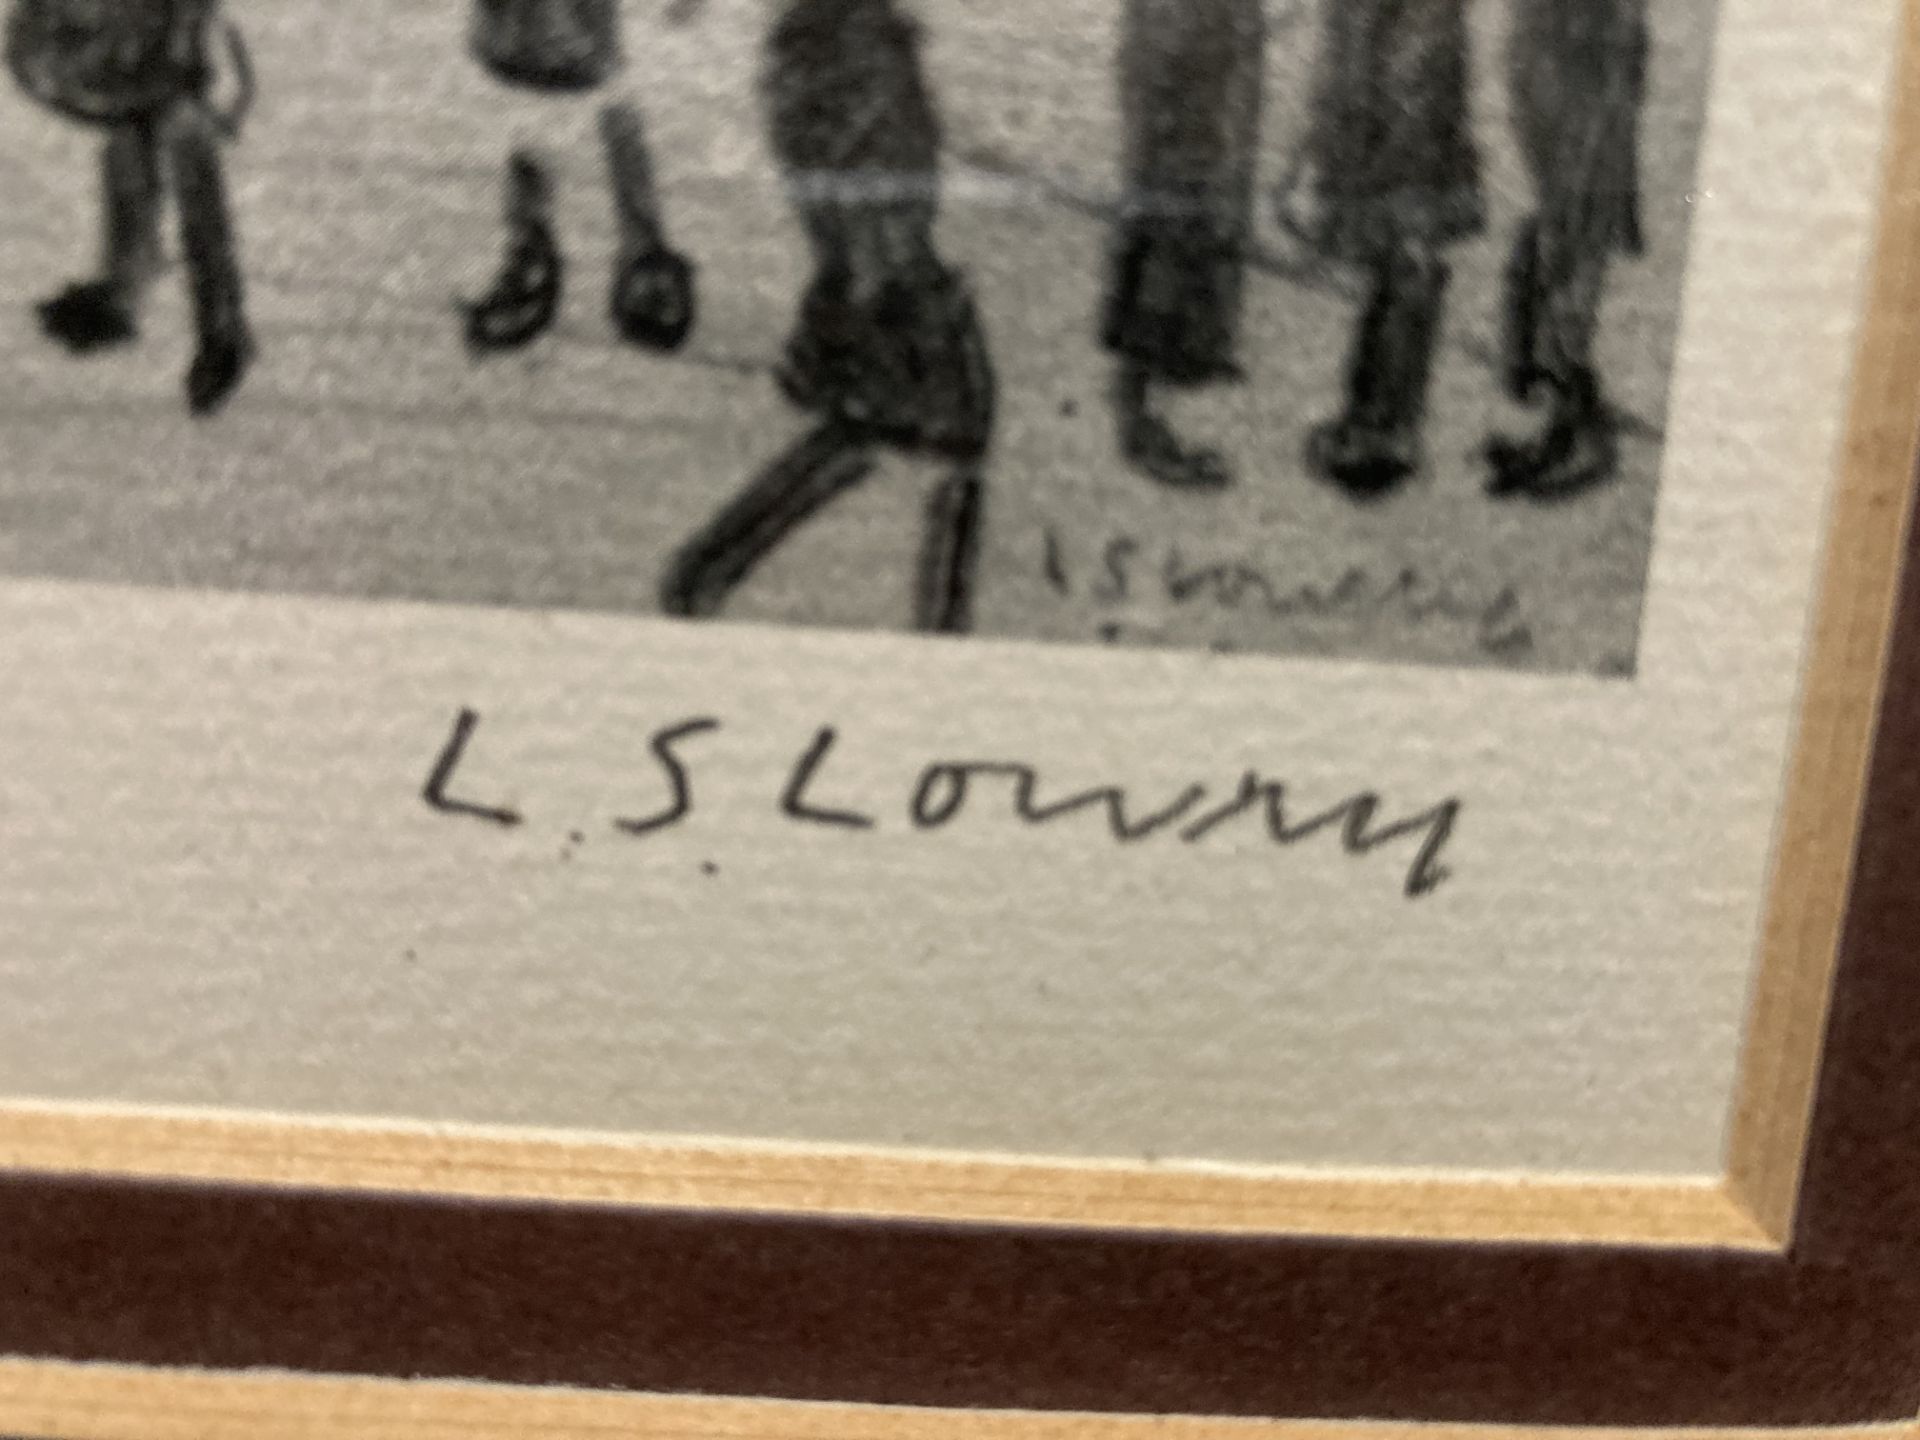 † L S Lowry (1887-1975), 'Reference Library', lithograph on paper, signed in pencil, - Image 15 of 17